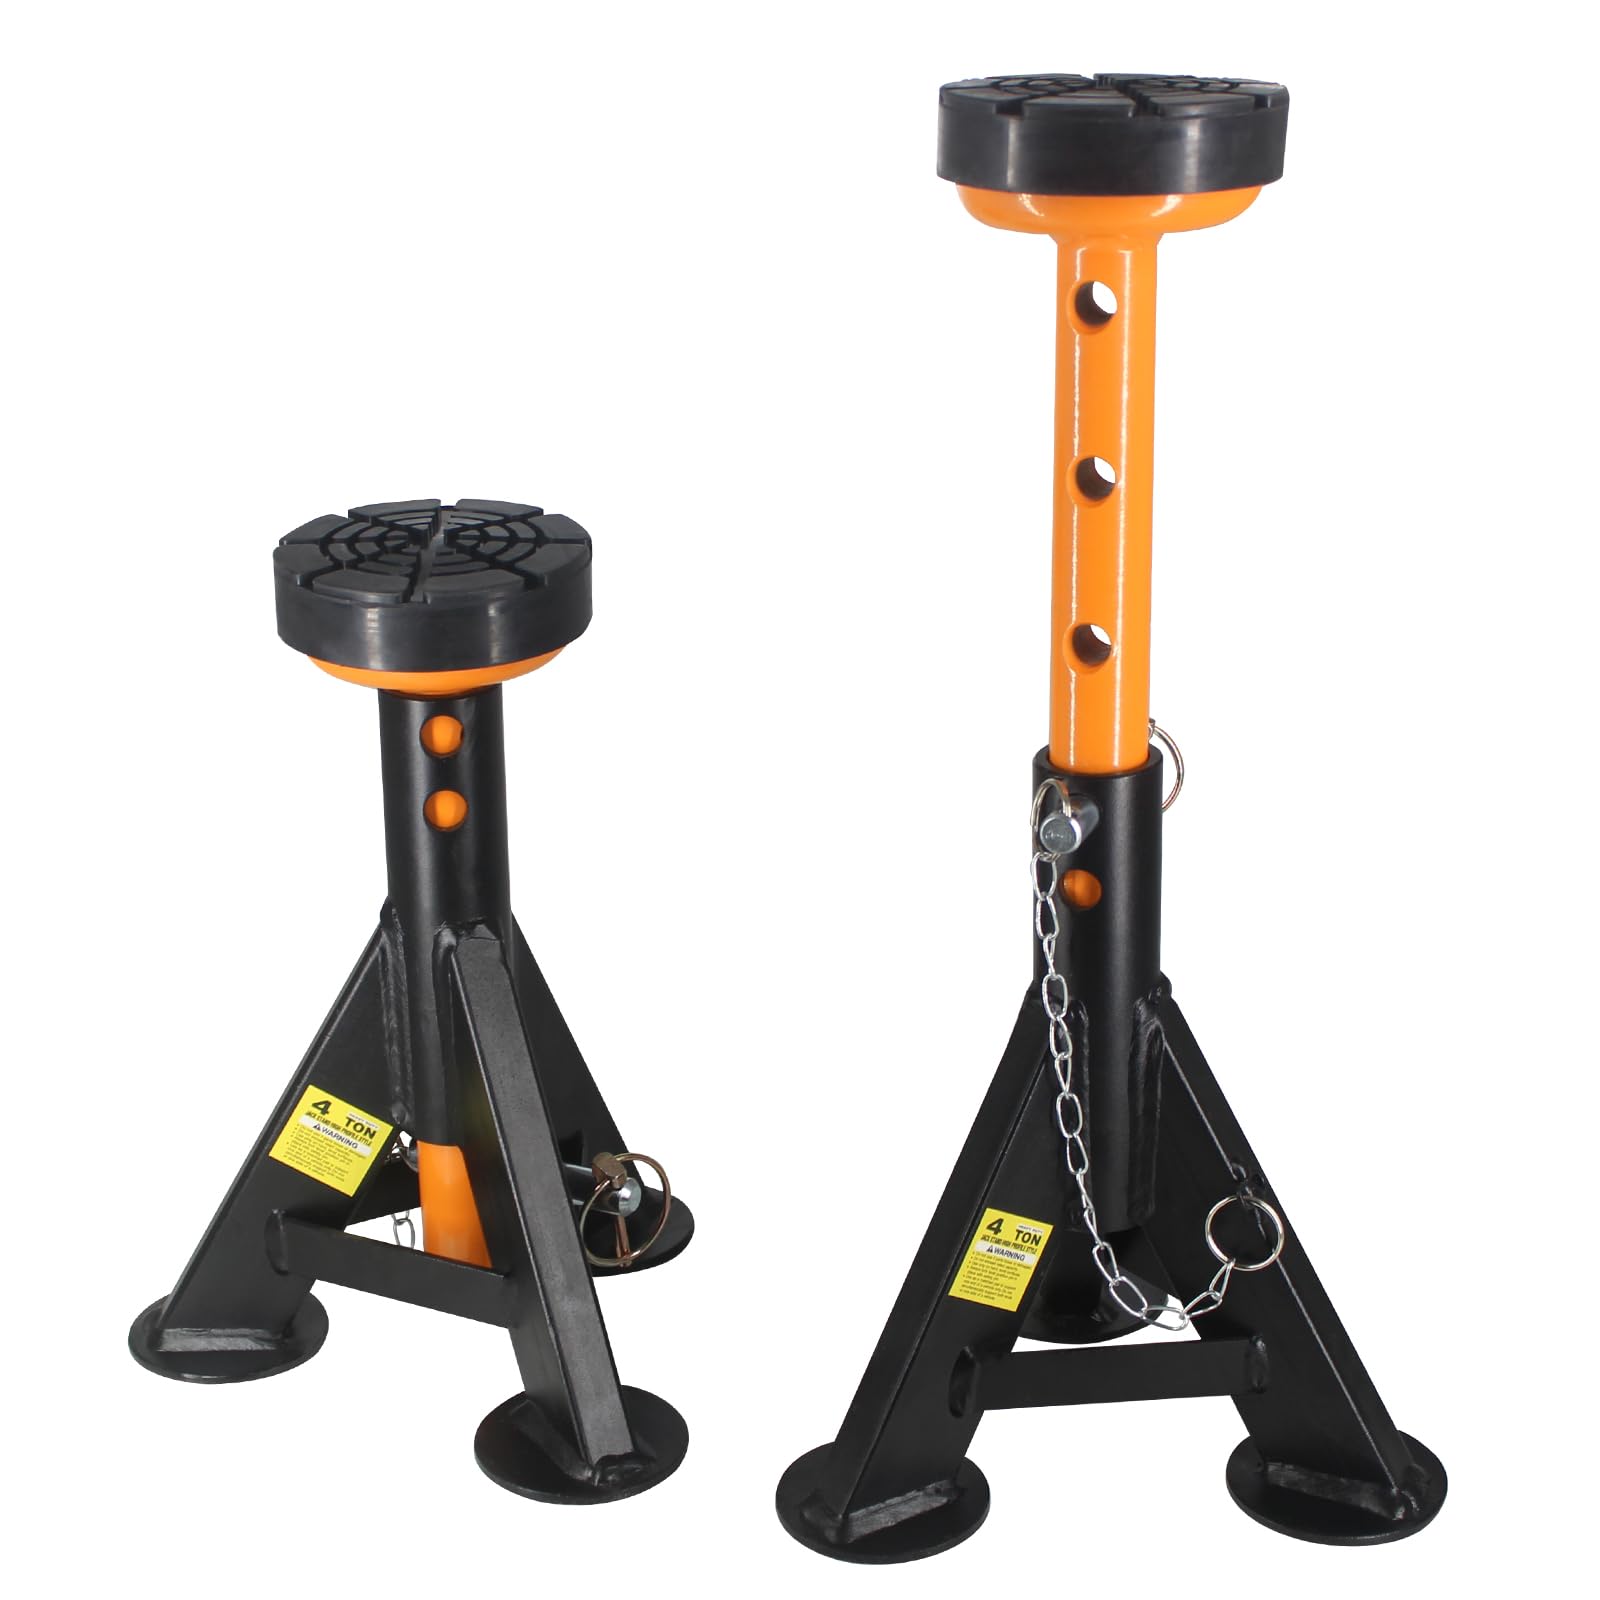 BESTOOL Low Profile Car Jack Stand | Mini Jack Stand with Security Locking Pins-4ton(8000Ibs) Capacity, 2 Pack